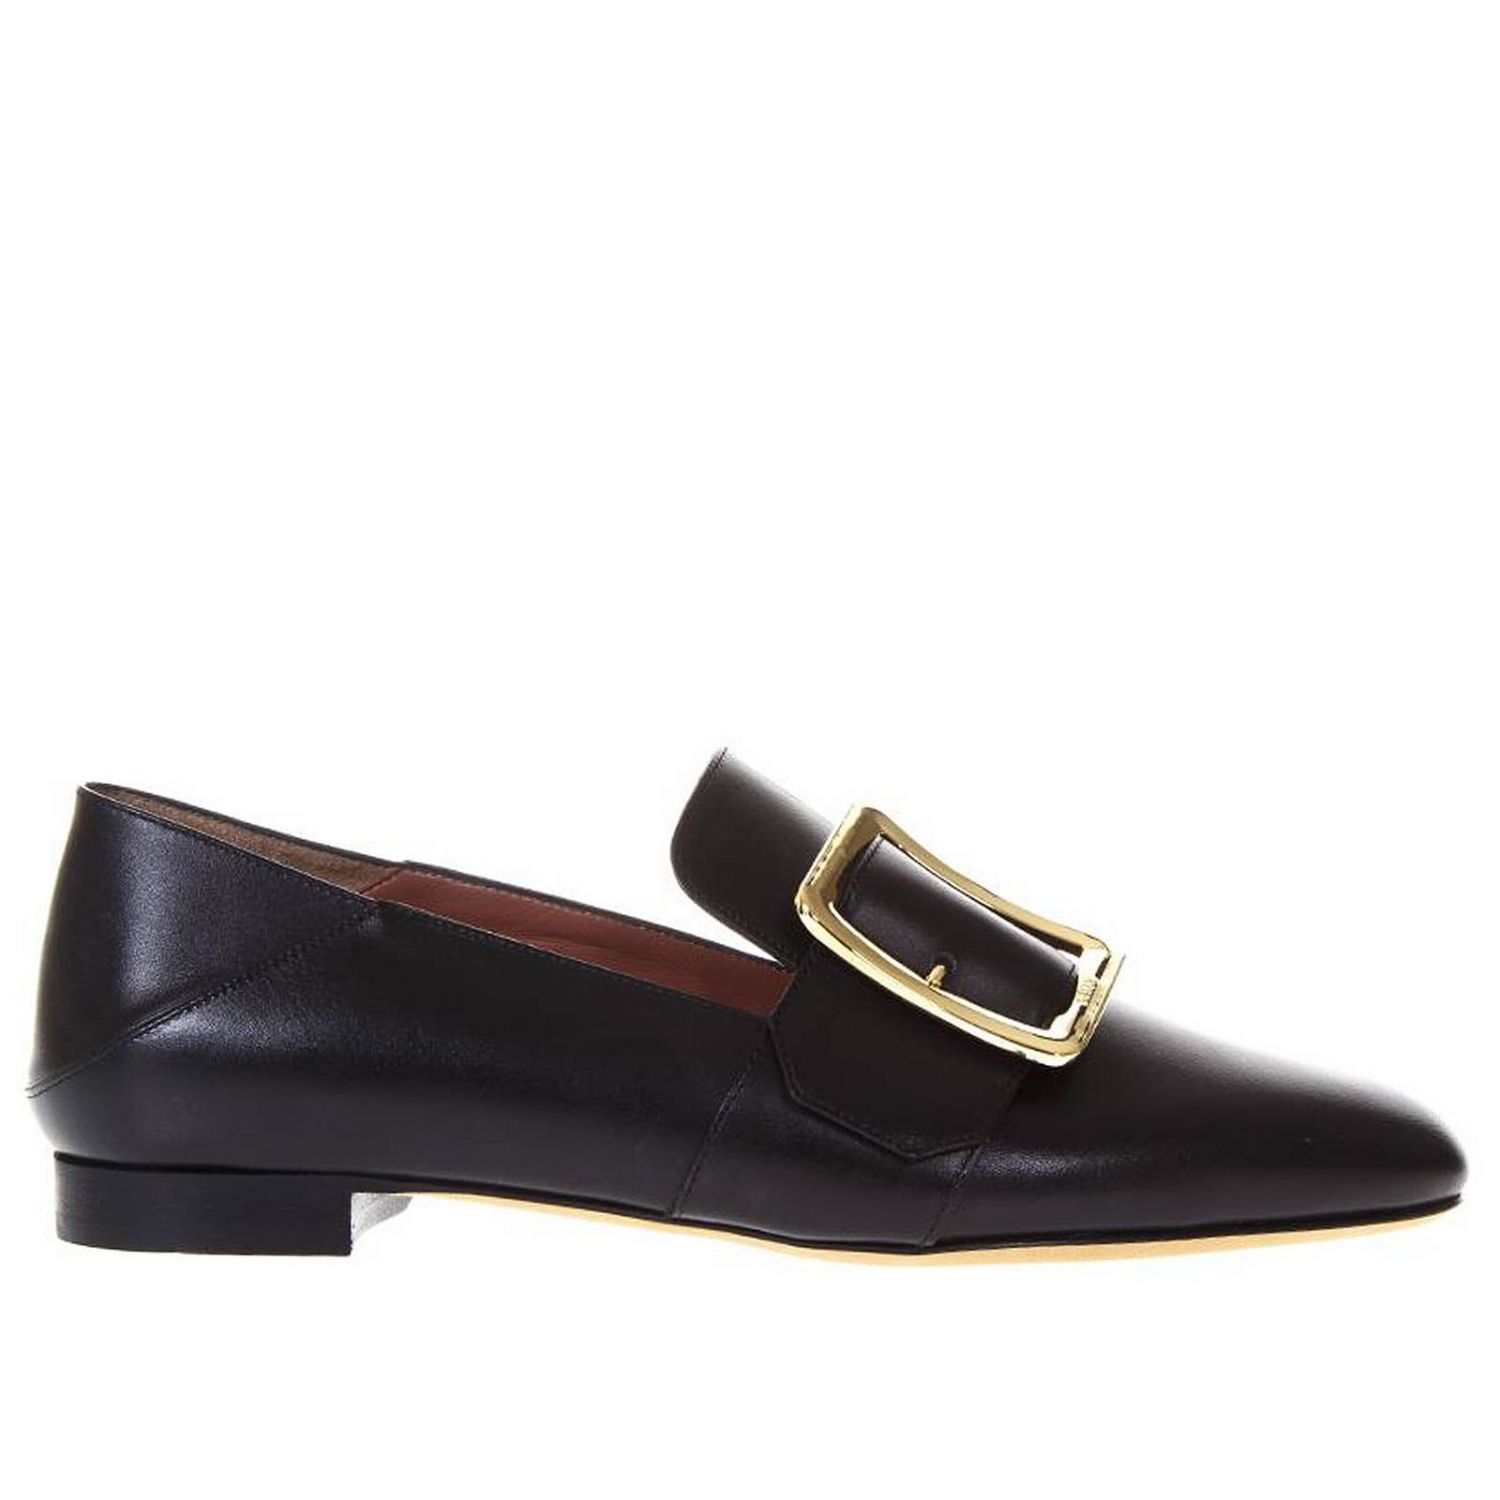 Bally Outlet: Loafers women - Black | Loafers Bally 621399 GIGLIO.COM